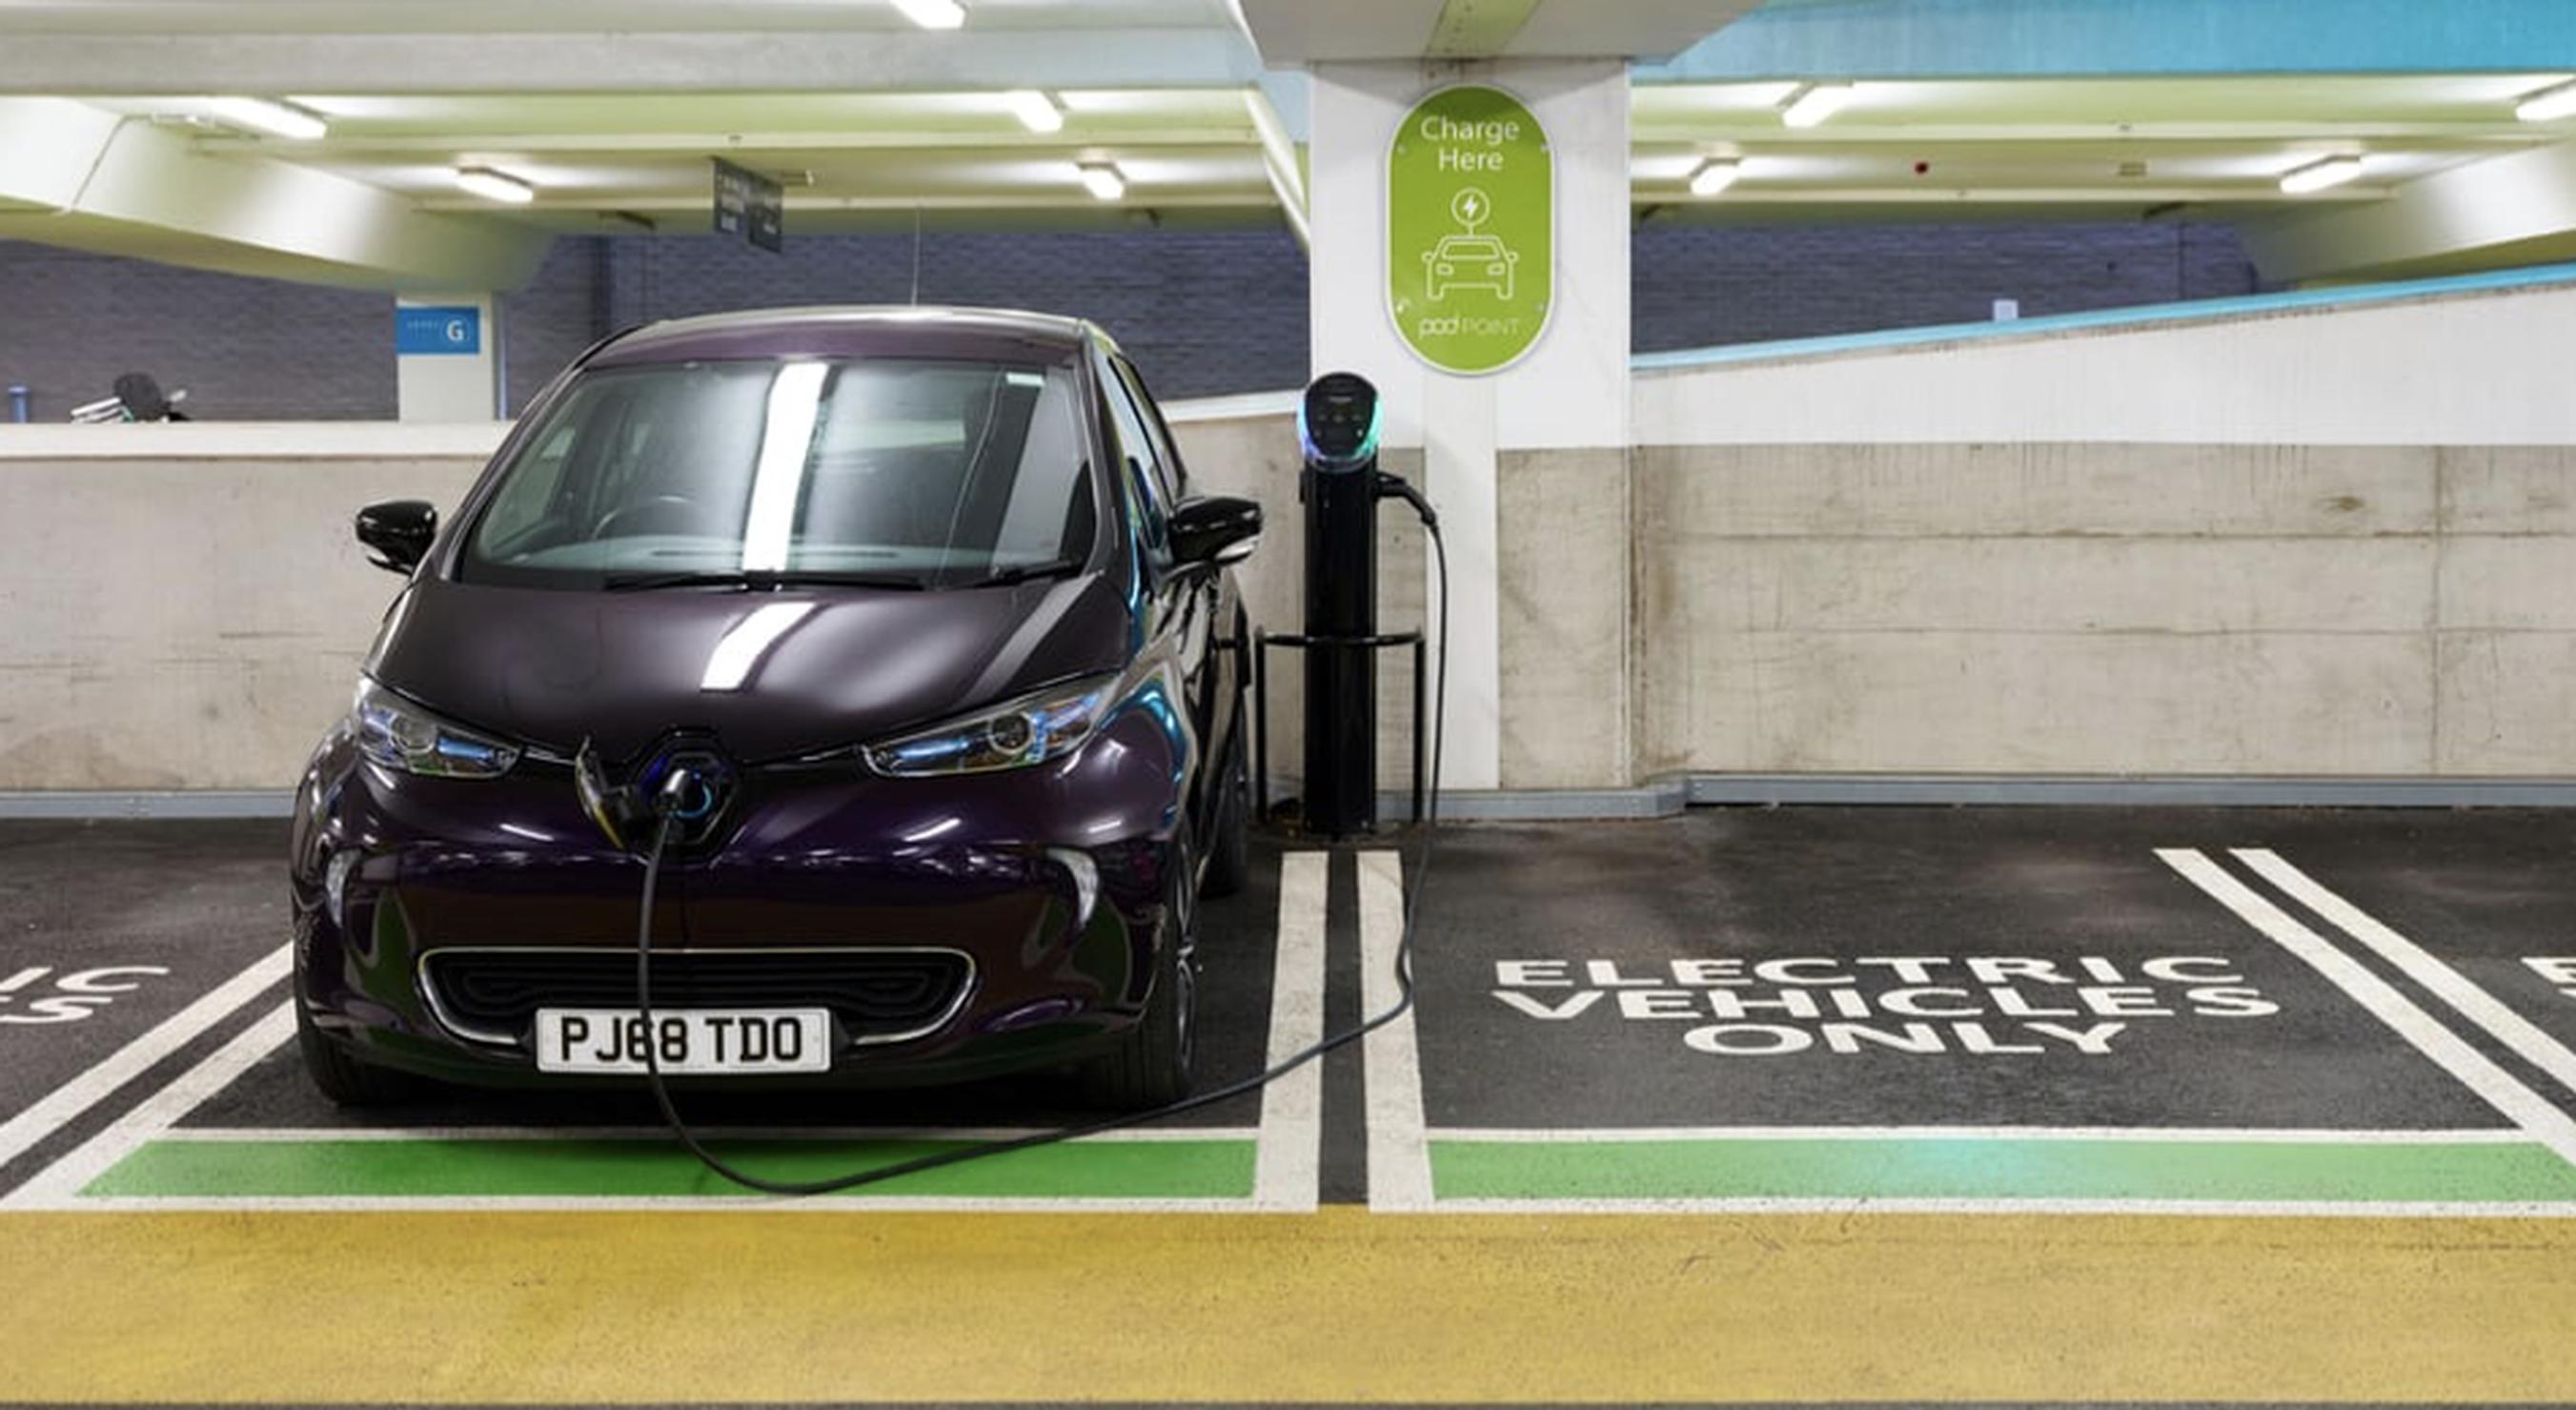 There are now an estimated 456,000 battery-electric cars in the UK